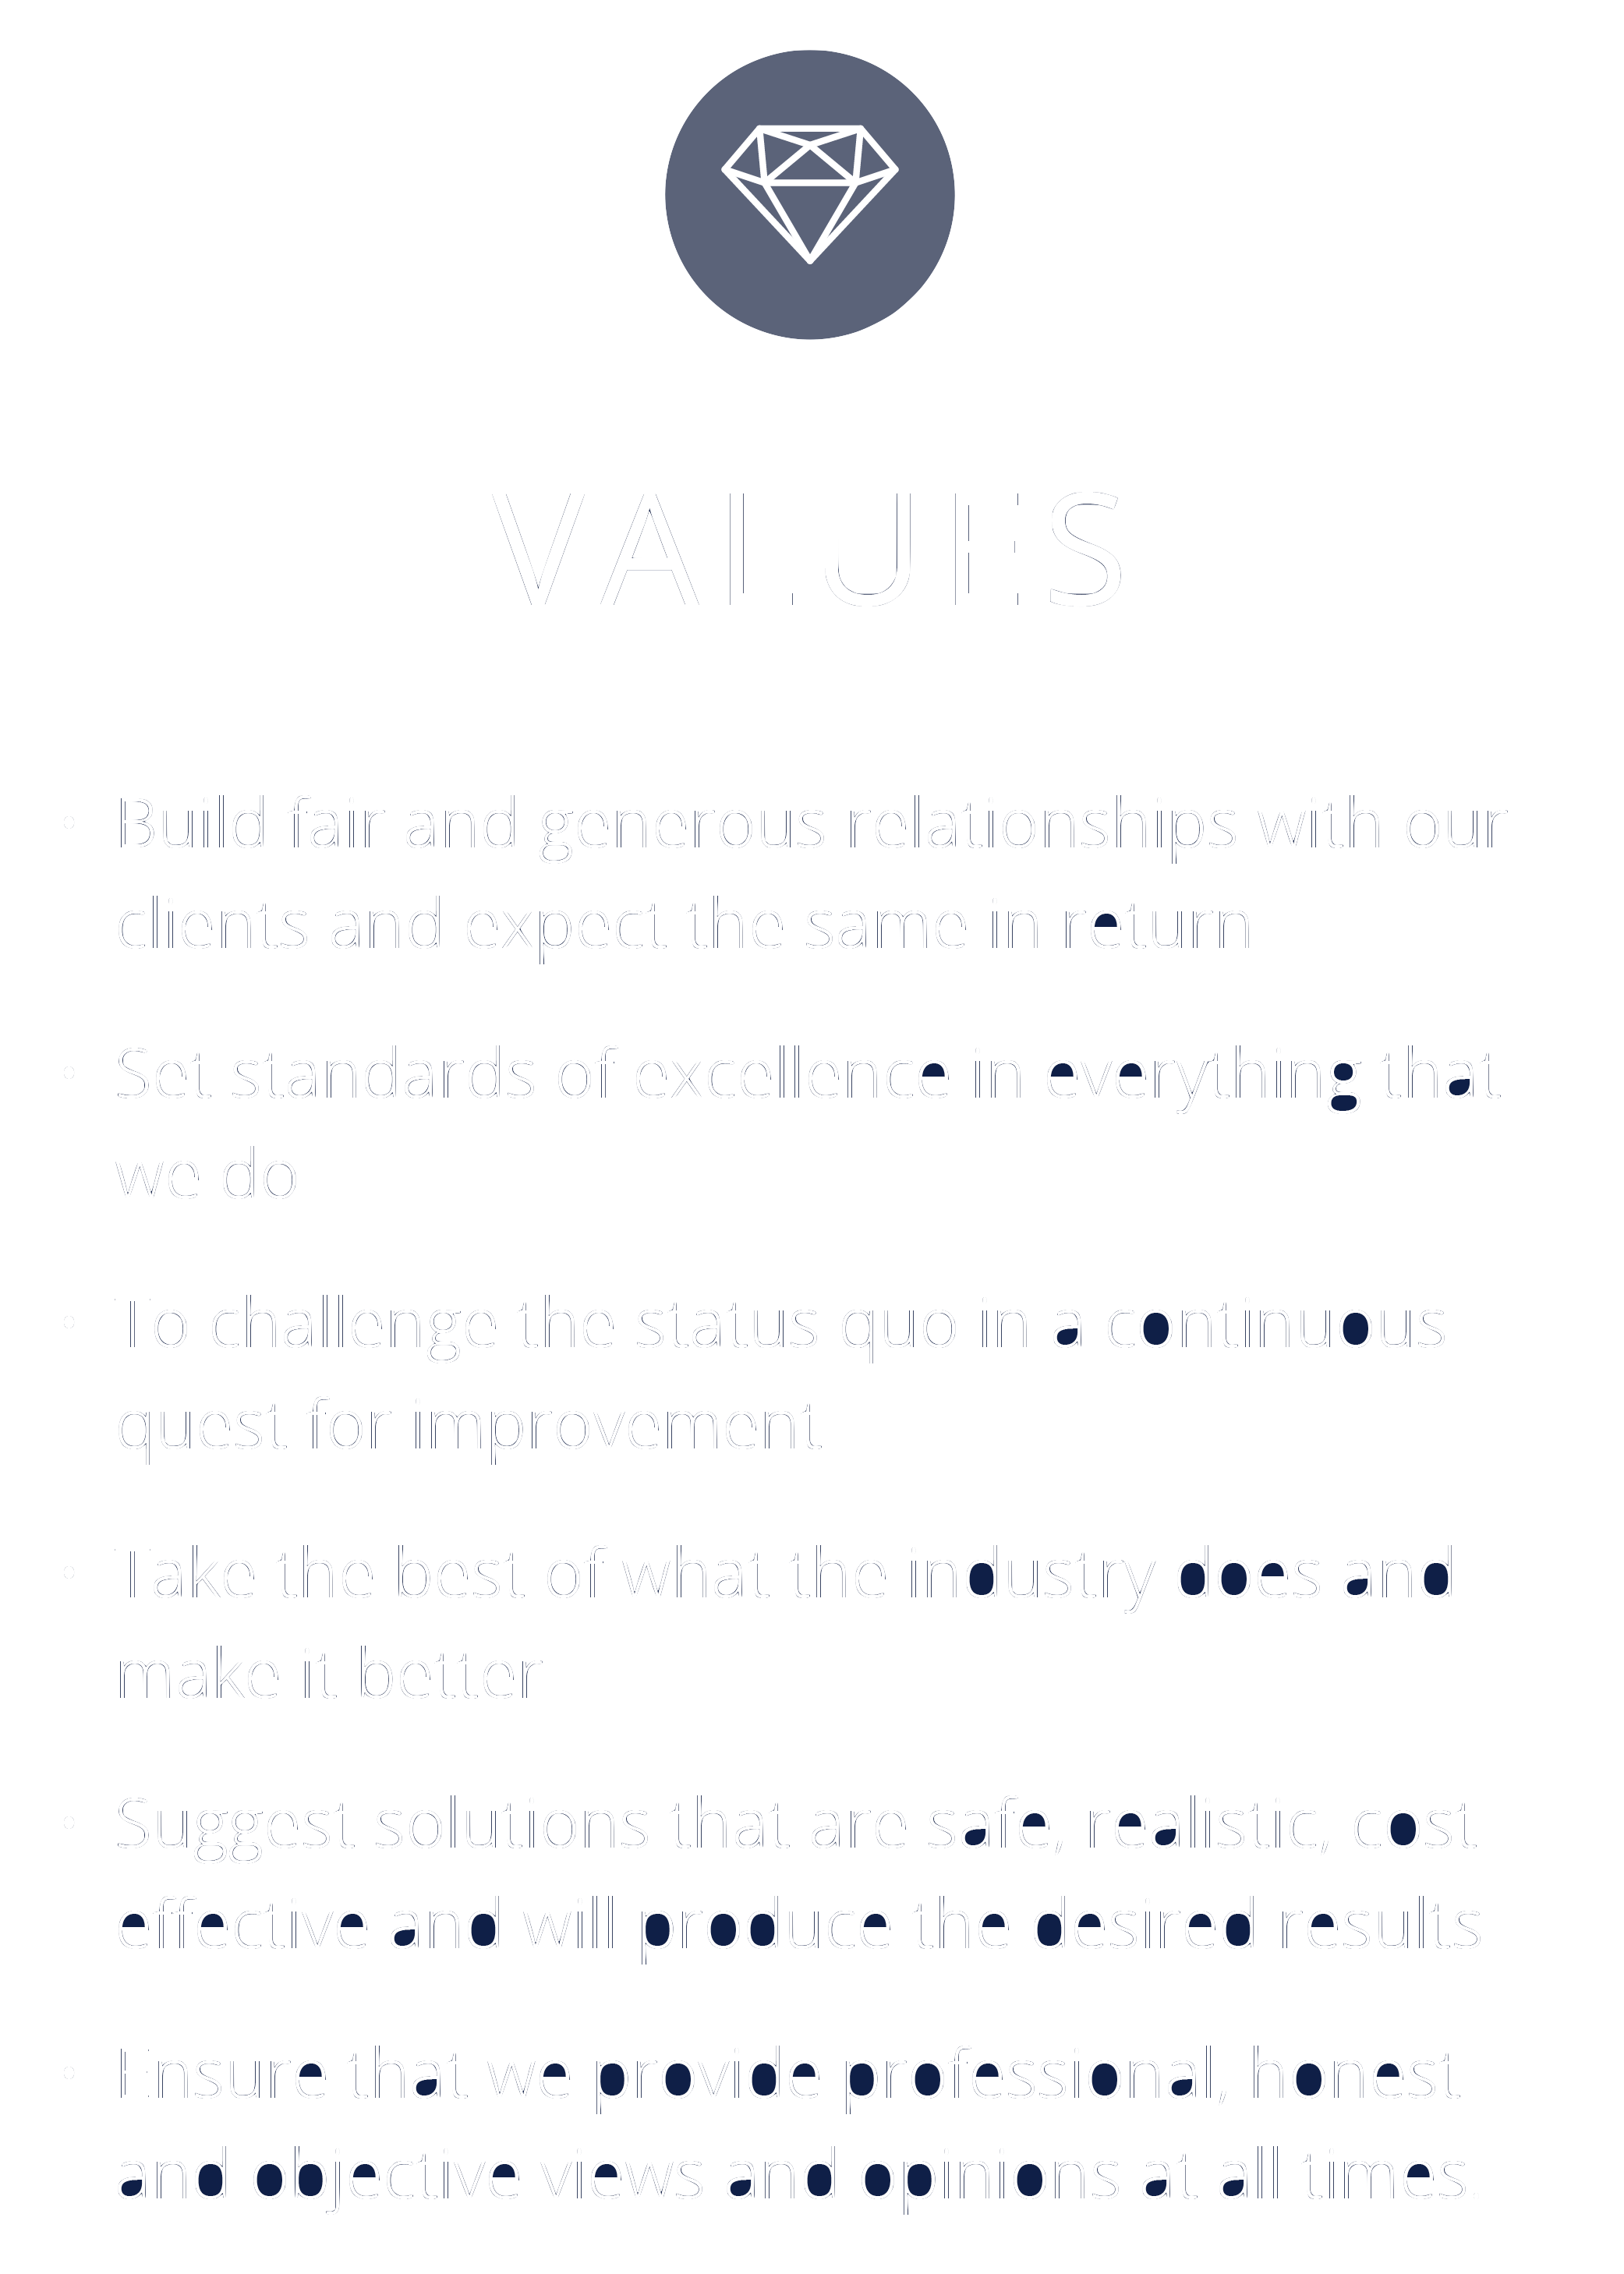 VALUES3.png